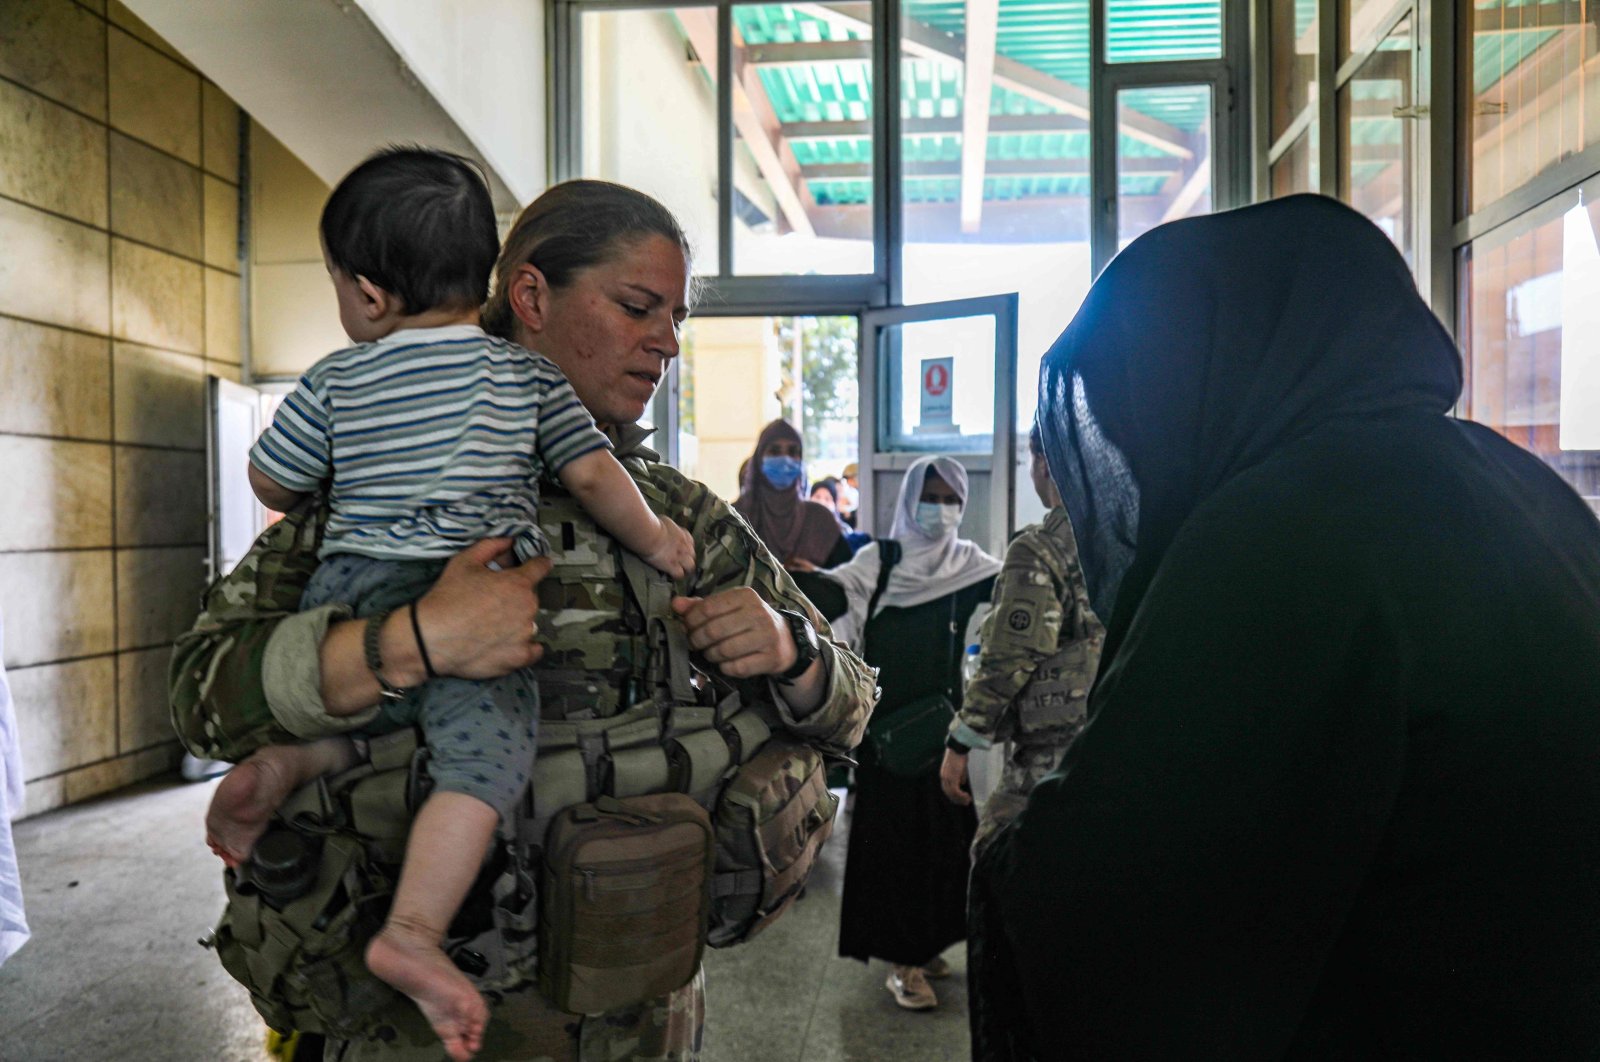 A medical officer assigned to the 82nd Airborne Division speaks with an Afghan woman and helps her with her child as part of the ongoing noncombatant evacuation of U.S. civilian personnel, Special Immigrant Visa applicants, and other at-risk individuals from Afghanistan from Hamid Karzai International Airport in Kabul, Afghanistan, Aug. 25, 2021. (AFP Photo)